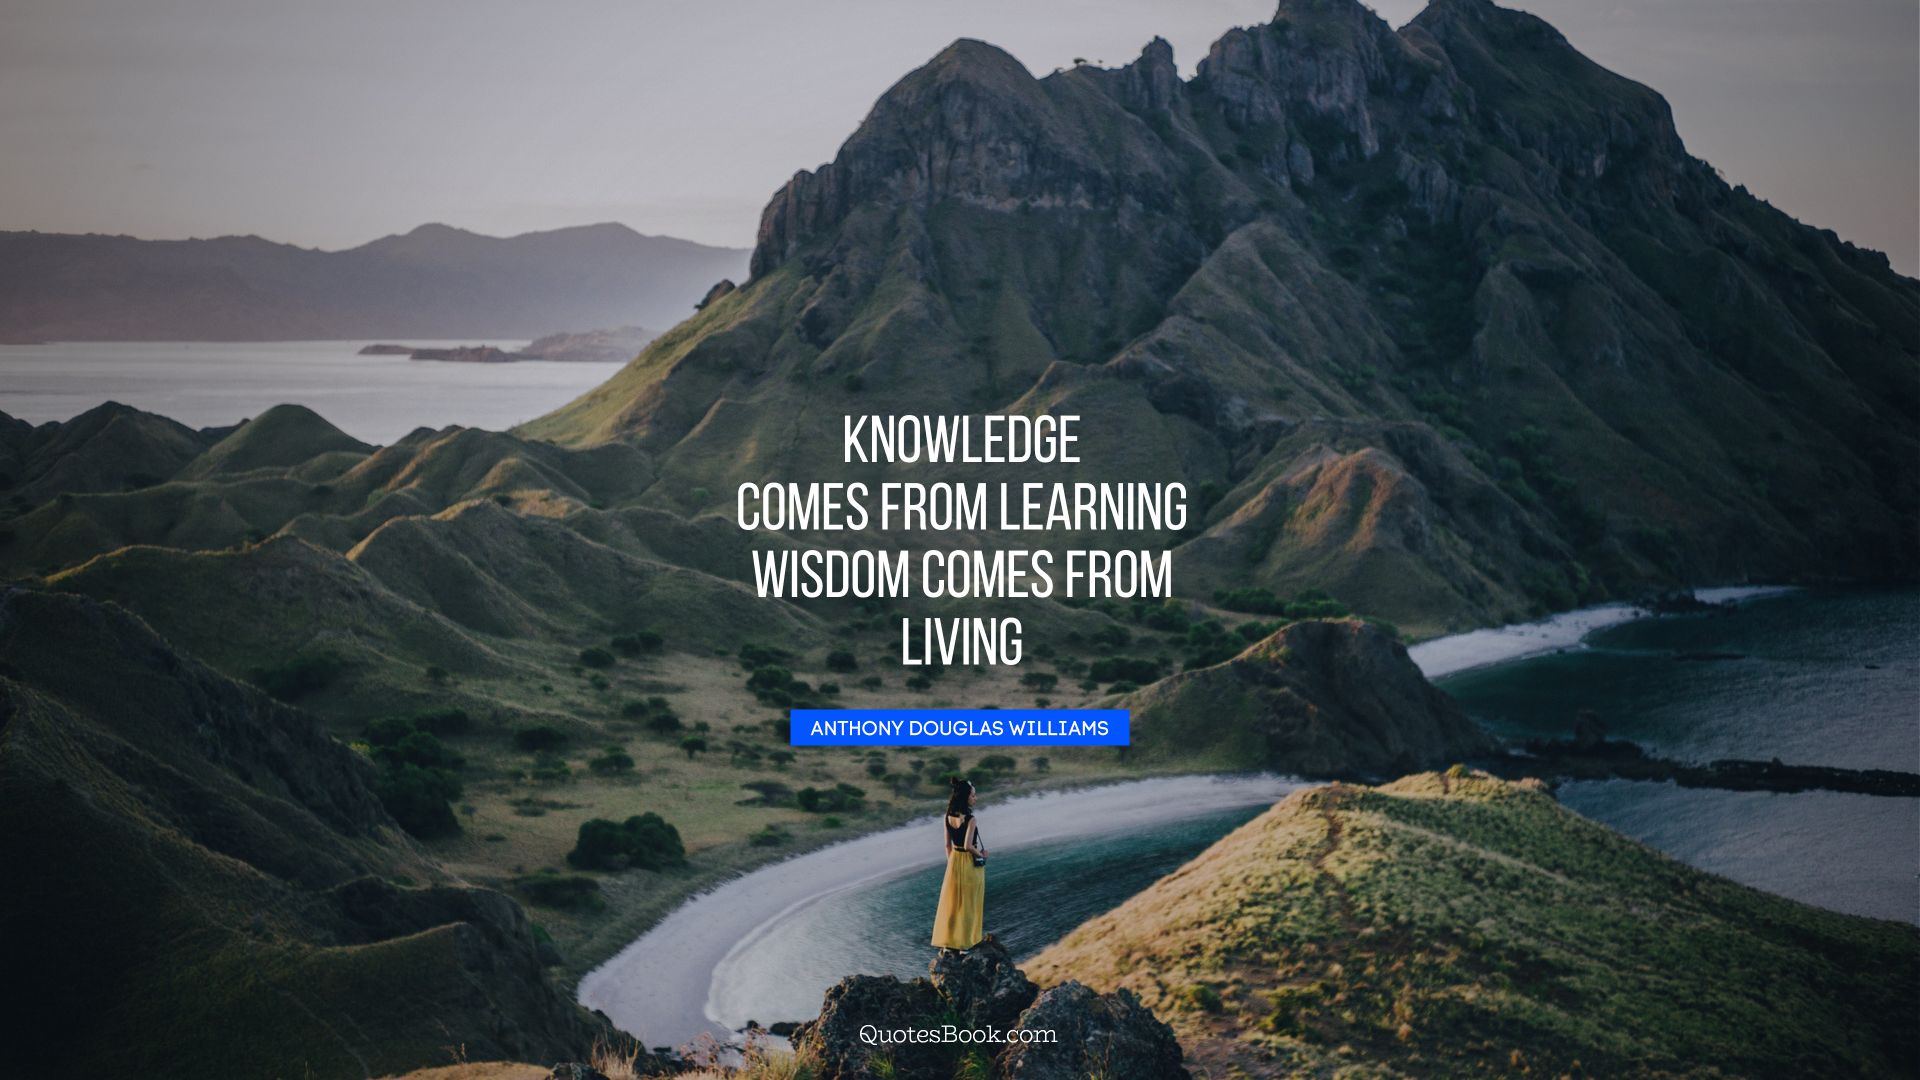 Knowledge comes from learning. Wisdom comes from living. - Quote by Anthony Douglas Williams